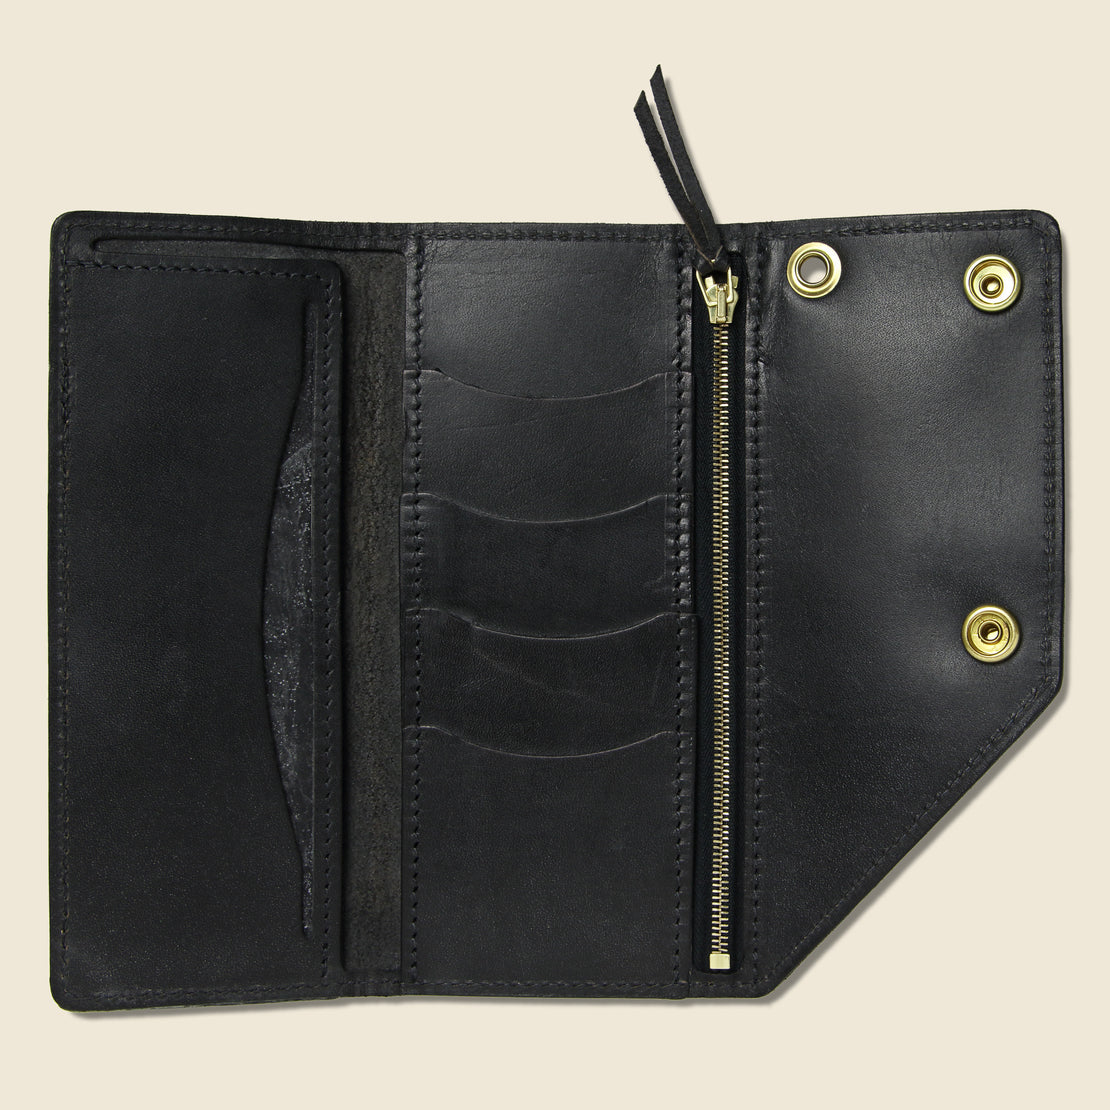 Workman Wallet - Black - Tanner - STAG Provisions - Accessories - Wallets